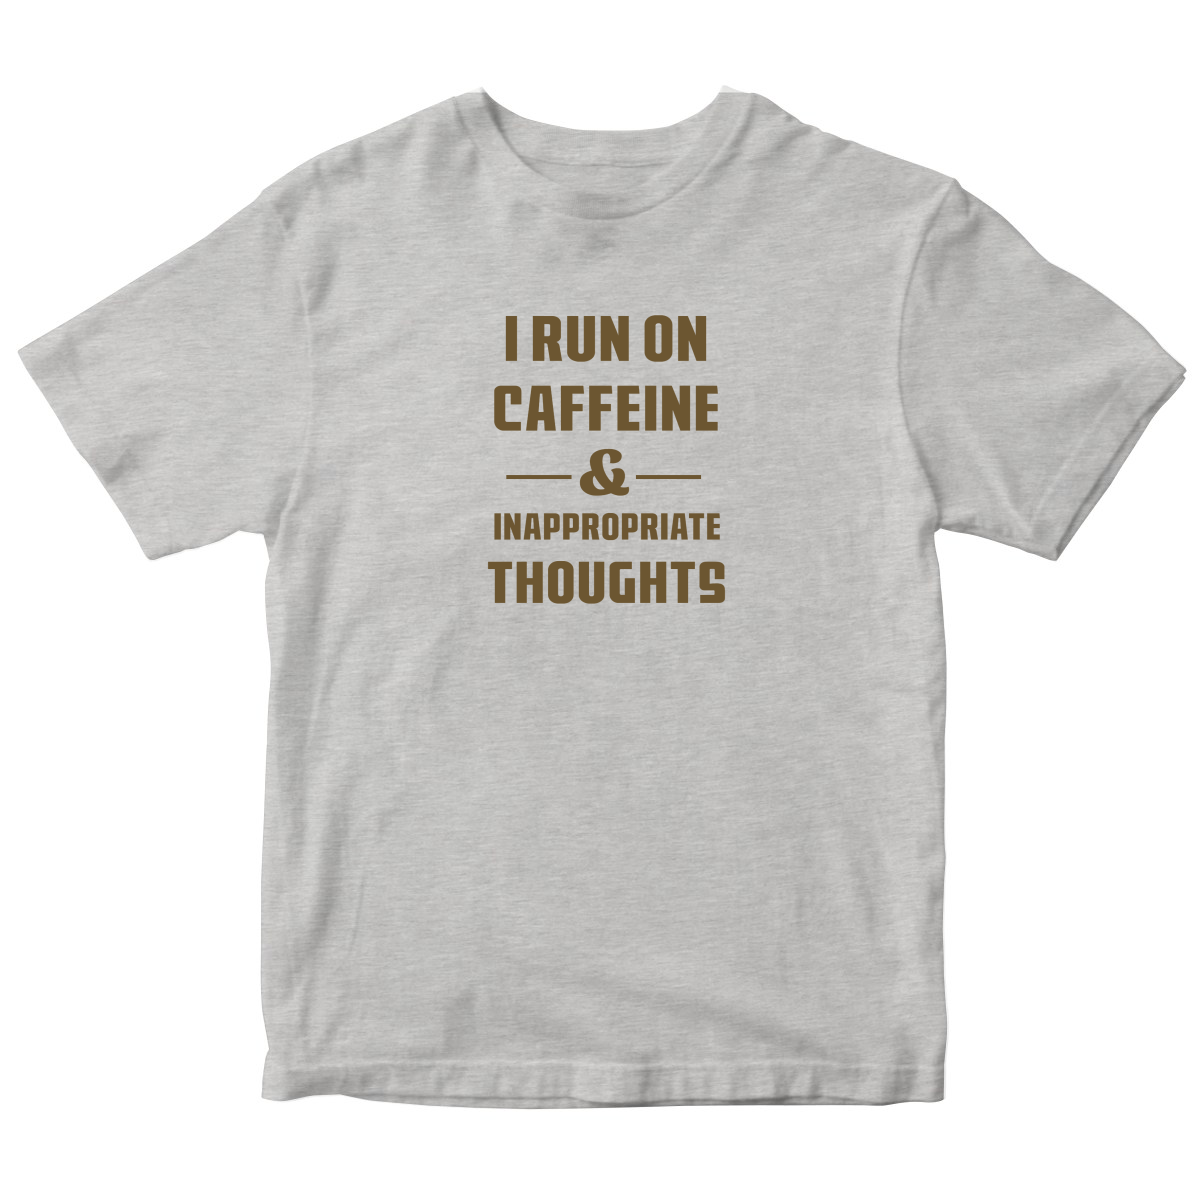 I Run On Caffeine and Inappropriate Thoughts Toddler T-shirt | Gray